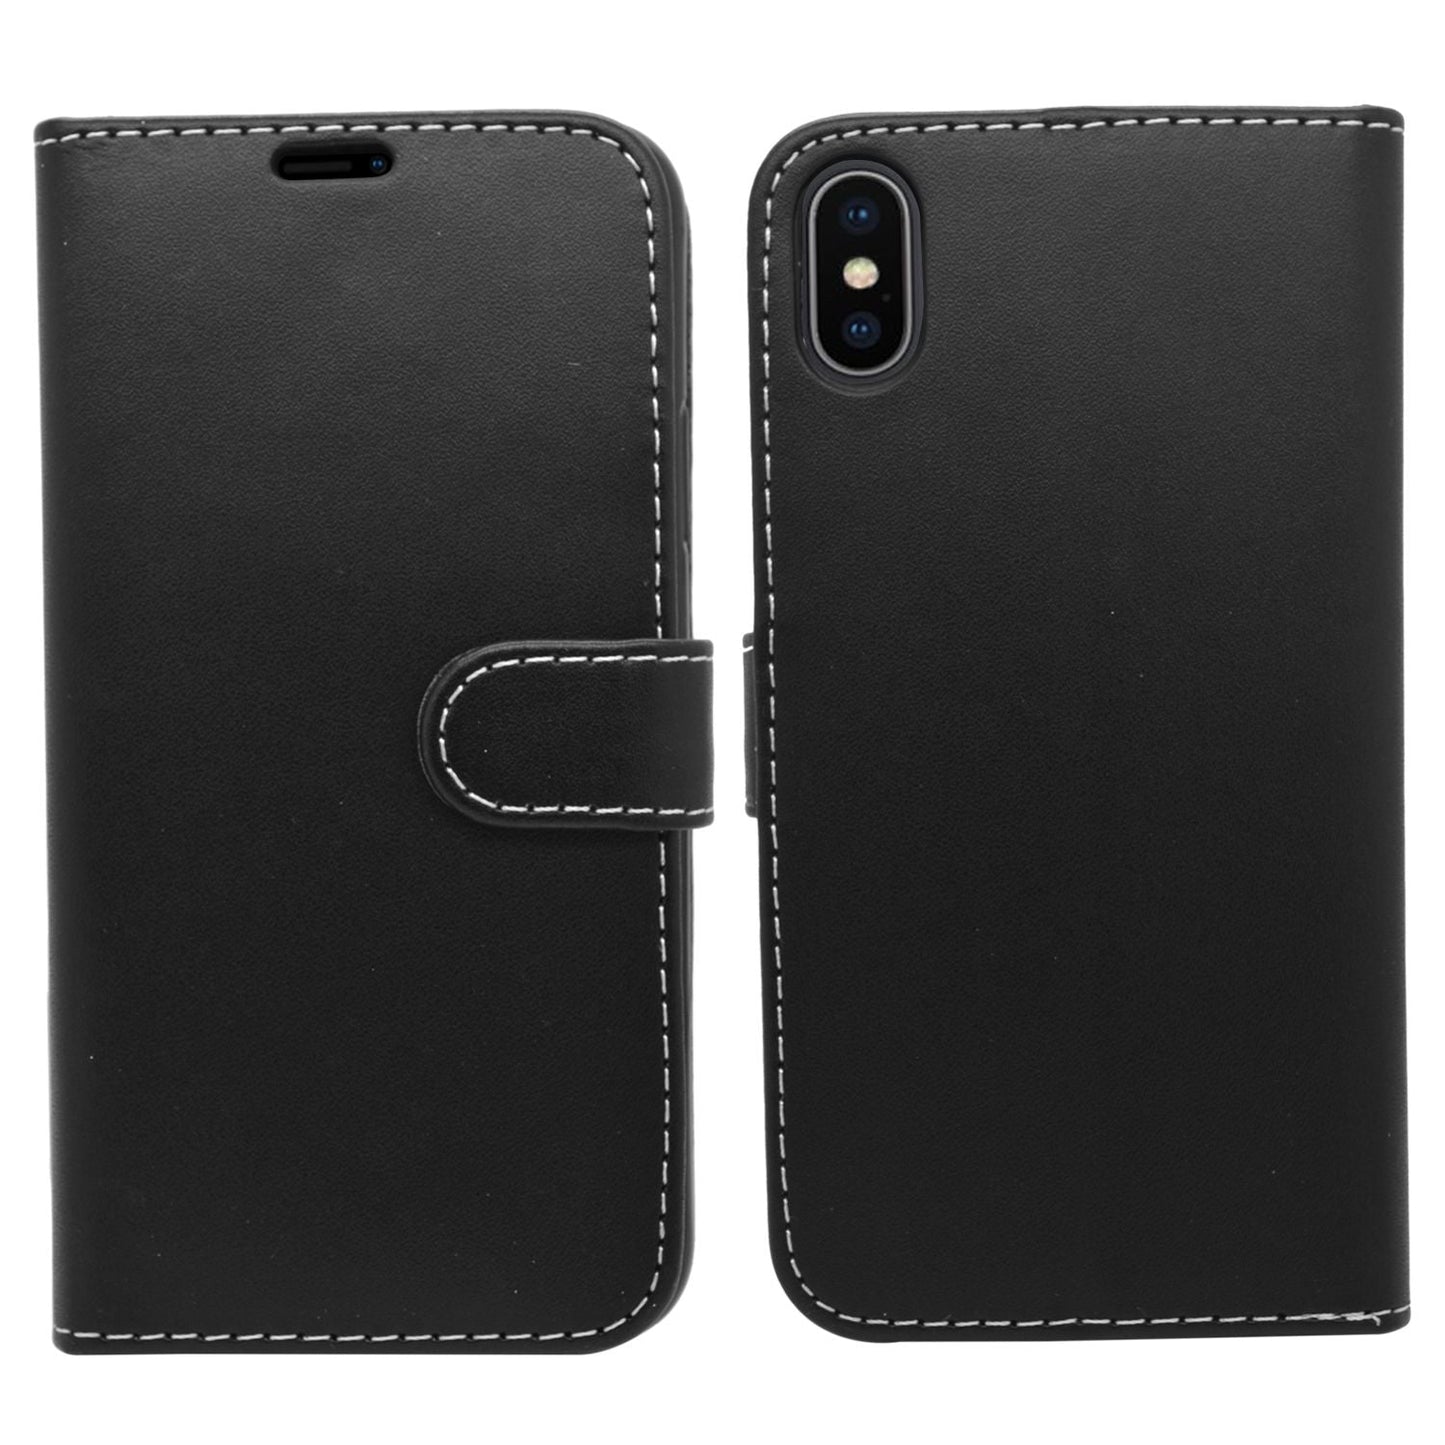 TechProtect Wallet for iPhone X/XS - Black